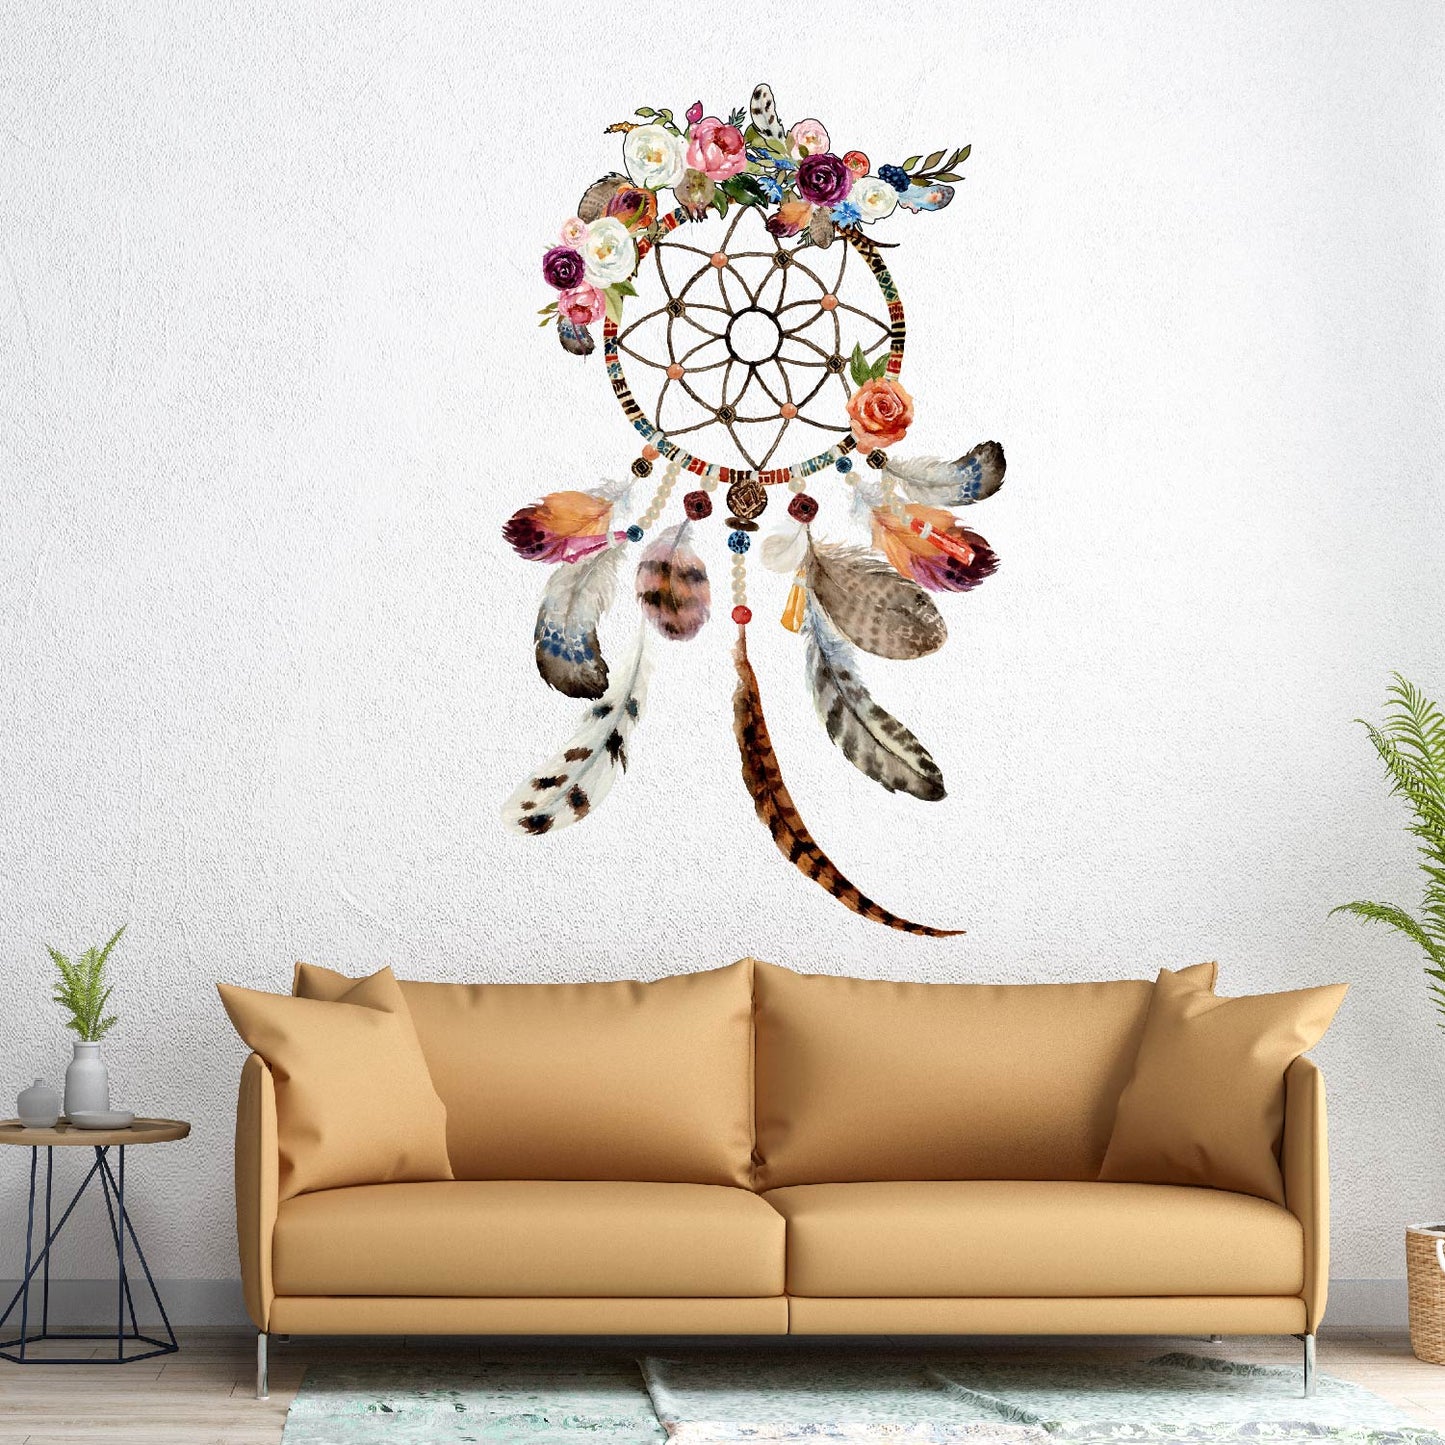 Boho Dreamcatcher and Flowers Fabric Wall Decals - Picture Perfect Decals